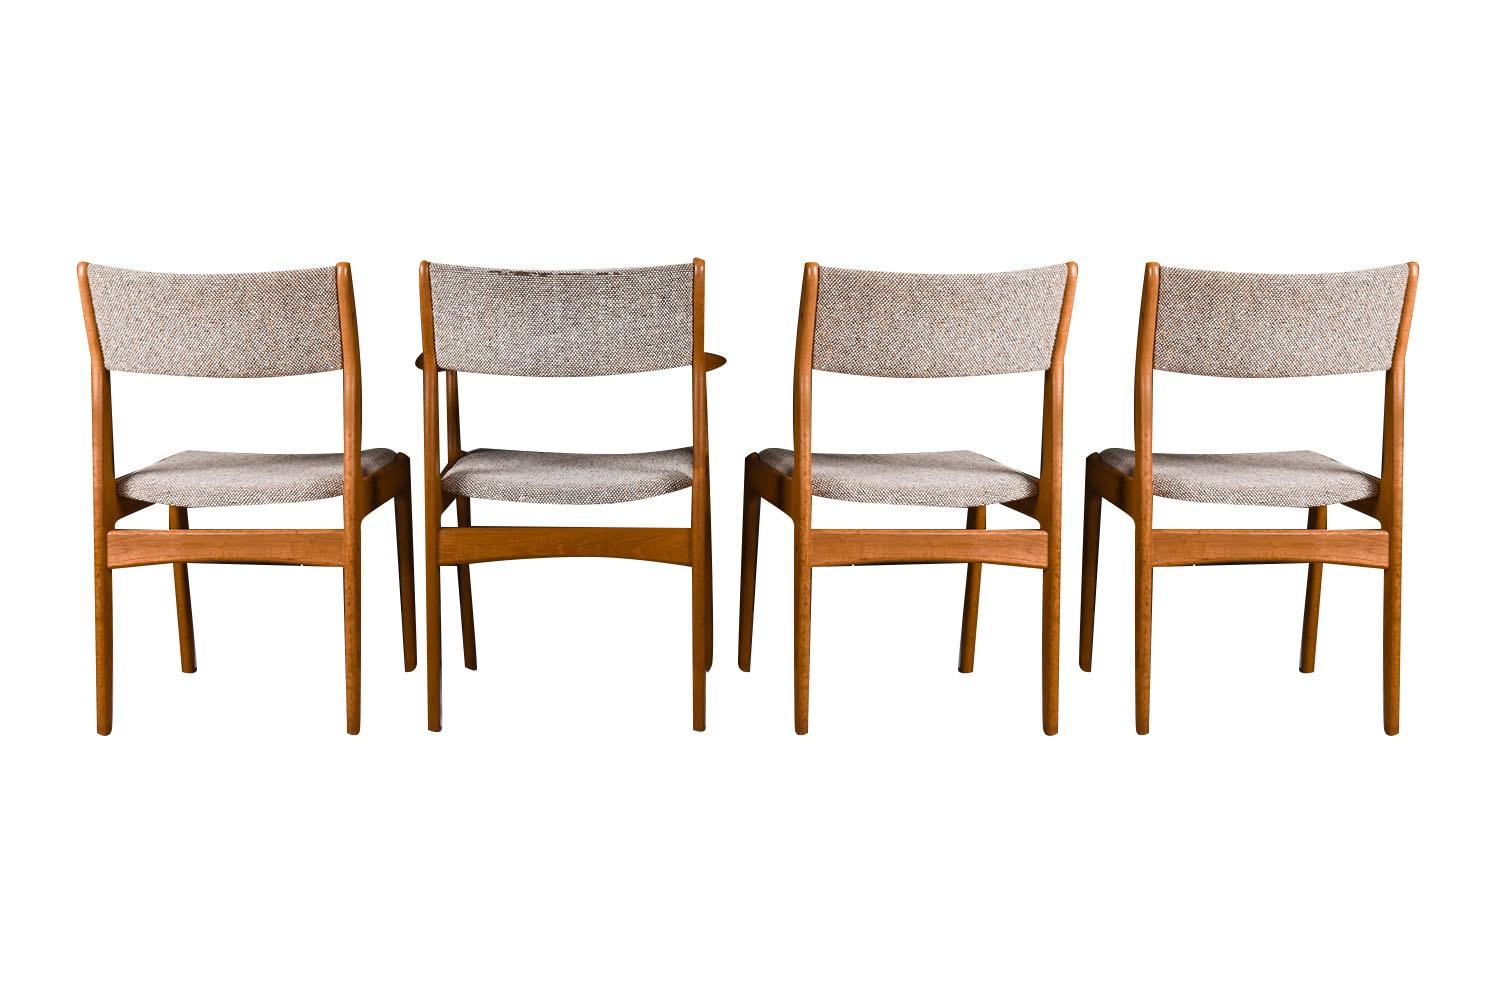 Singaporean Midcentury Scandinavia Woodworks Co Teak Dining Chairs For Sale